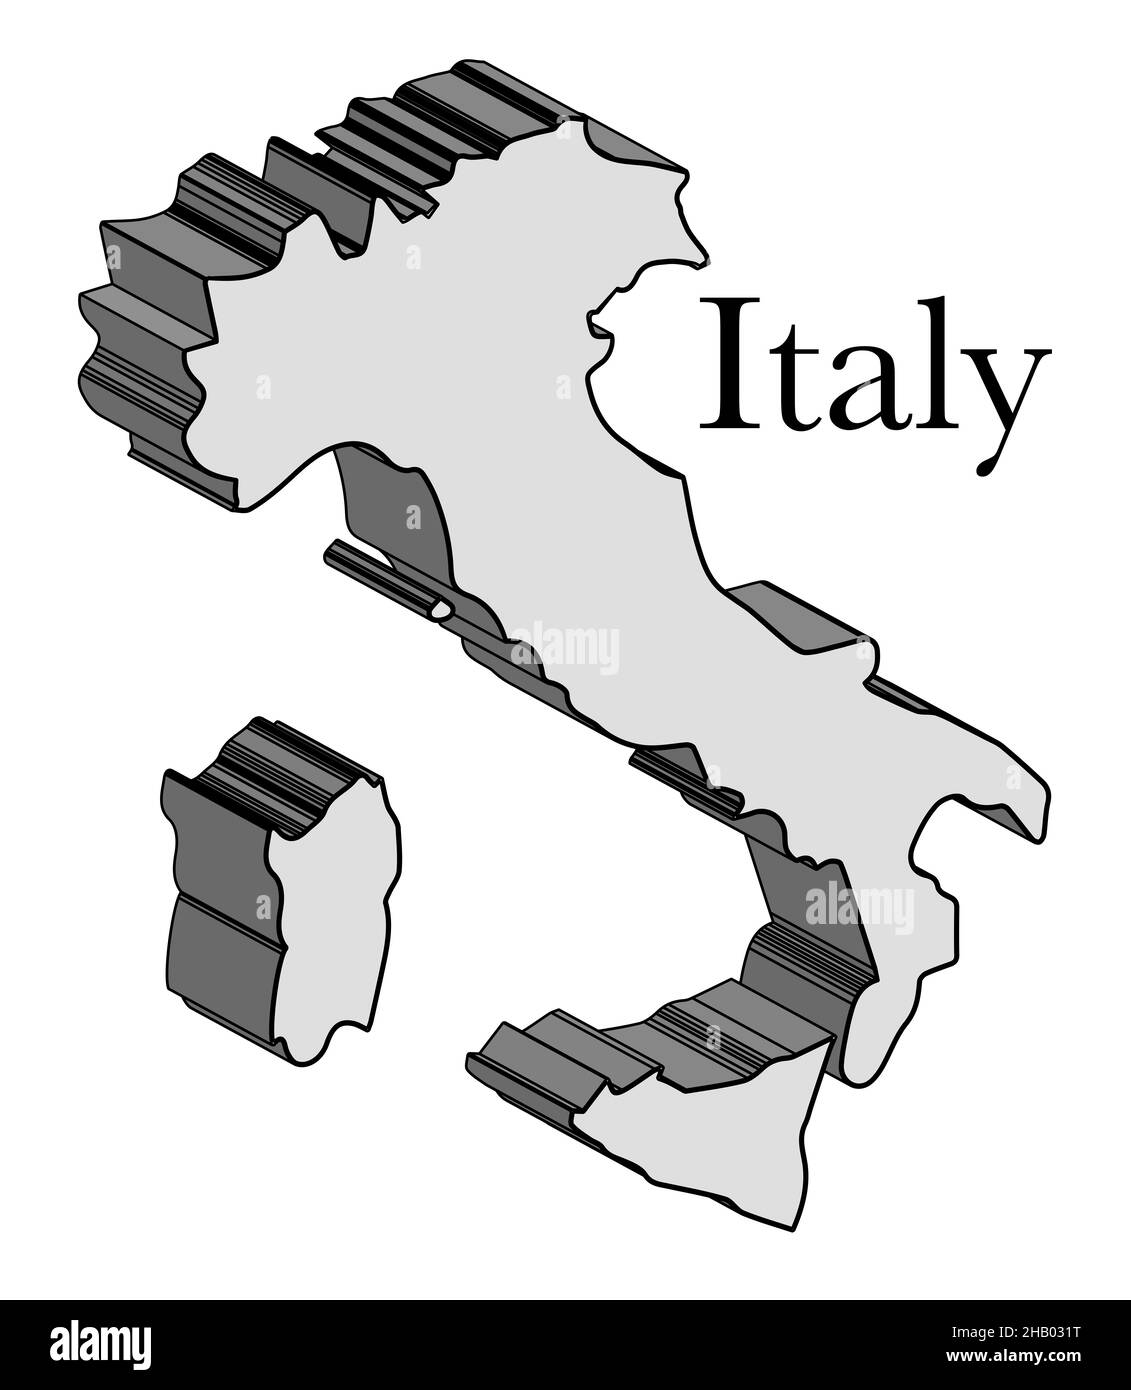 Outline 3D map of Italy over a white background Stock Photo